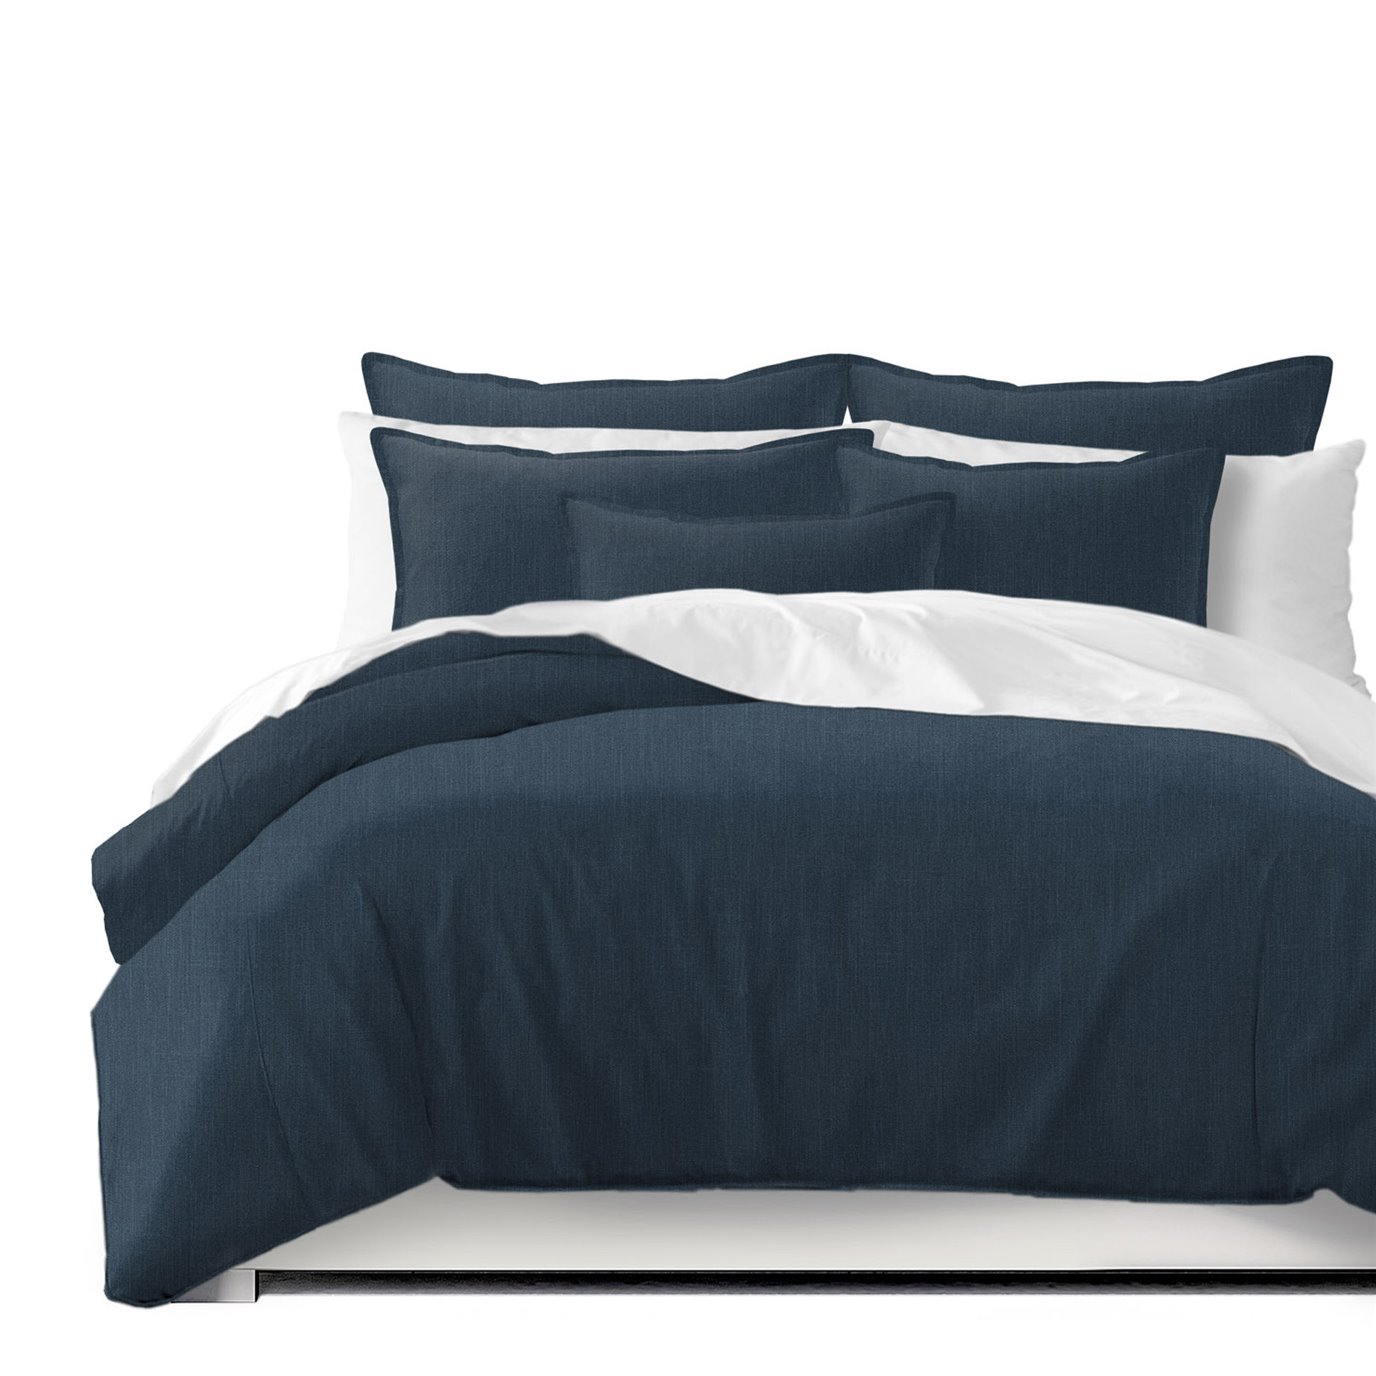 Sutton Navy Comforter and Pillow Sham(s) Set - Size Full